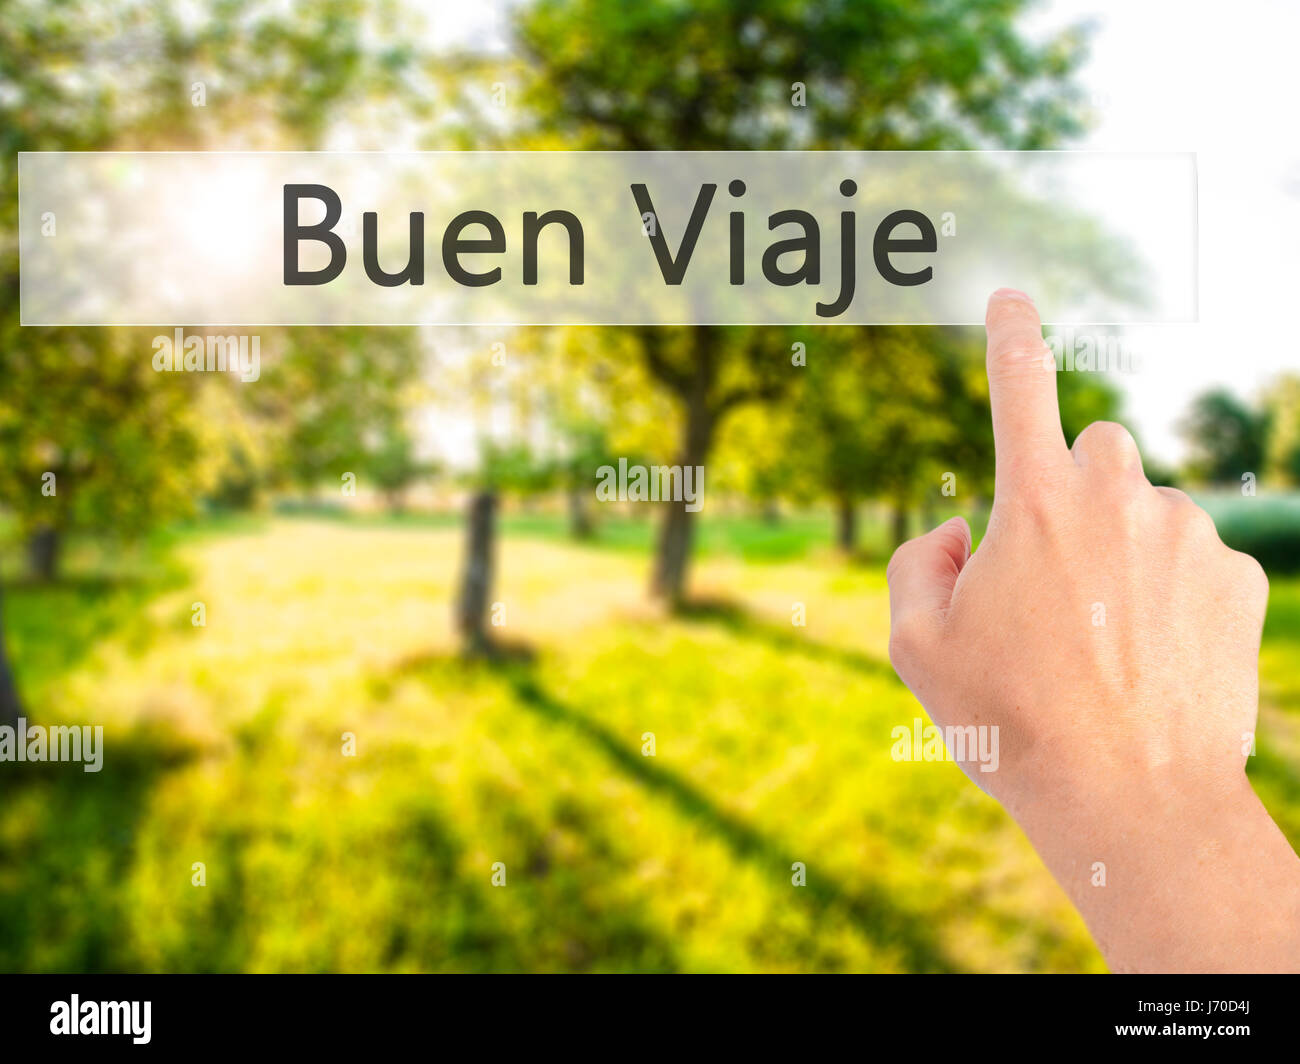 Buen Viaje (Good Trip in Spanish) - Hand pressing a button on blurred background concept . Business, technology, internet concept. Stock Photo Stock Photo